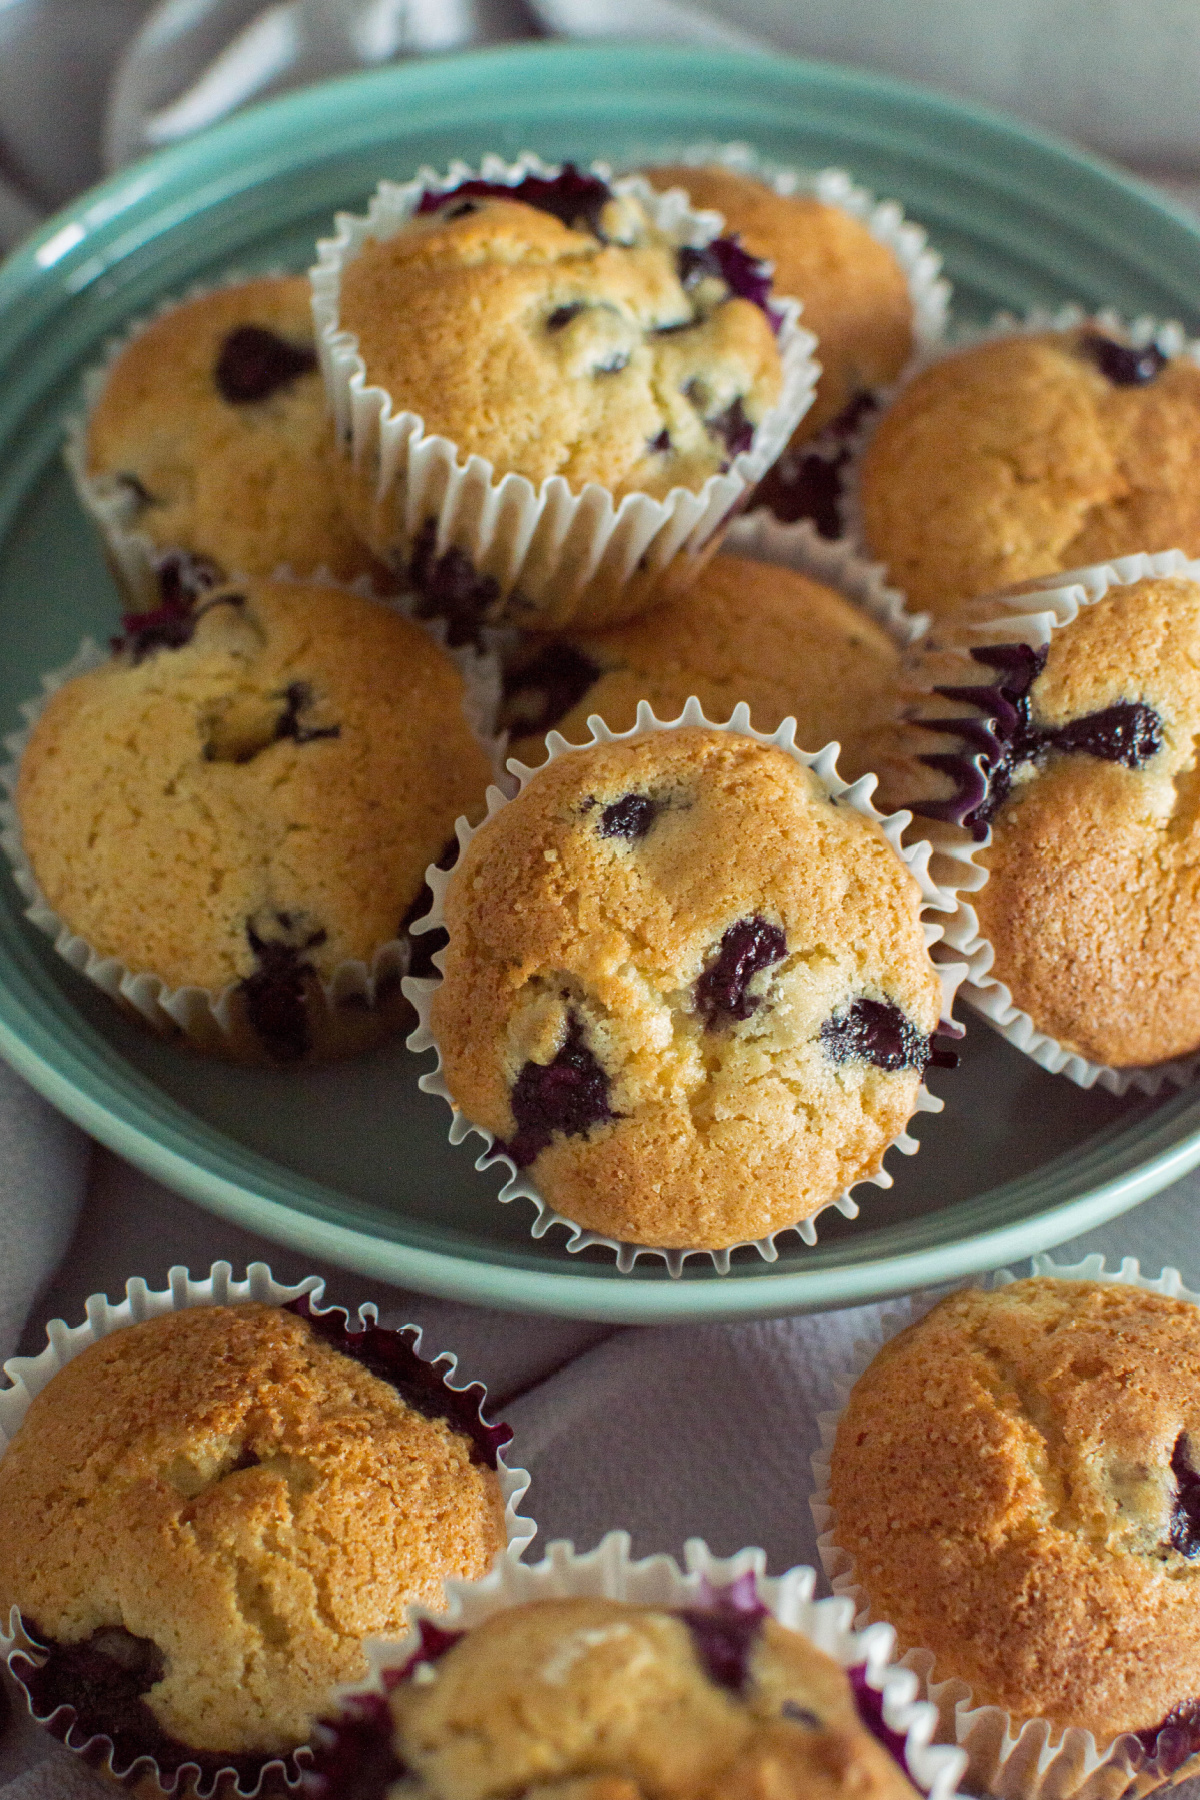 These old-fashioned blueberry muffins are simple but so delicous! Featuring a few simple ingredients, this muffin recipe is a great way to start your day off right!